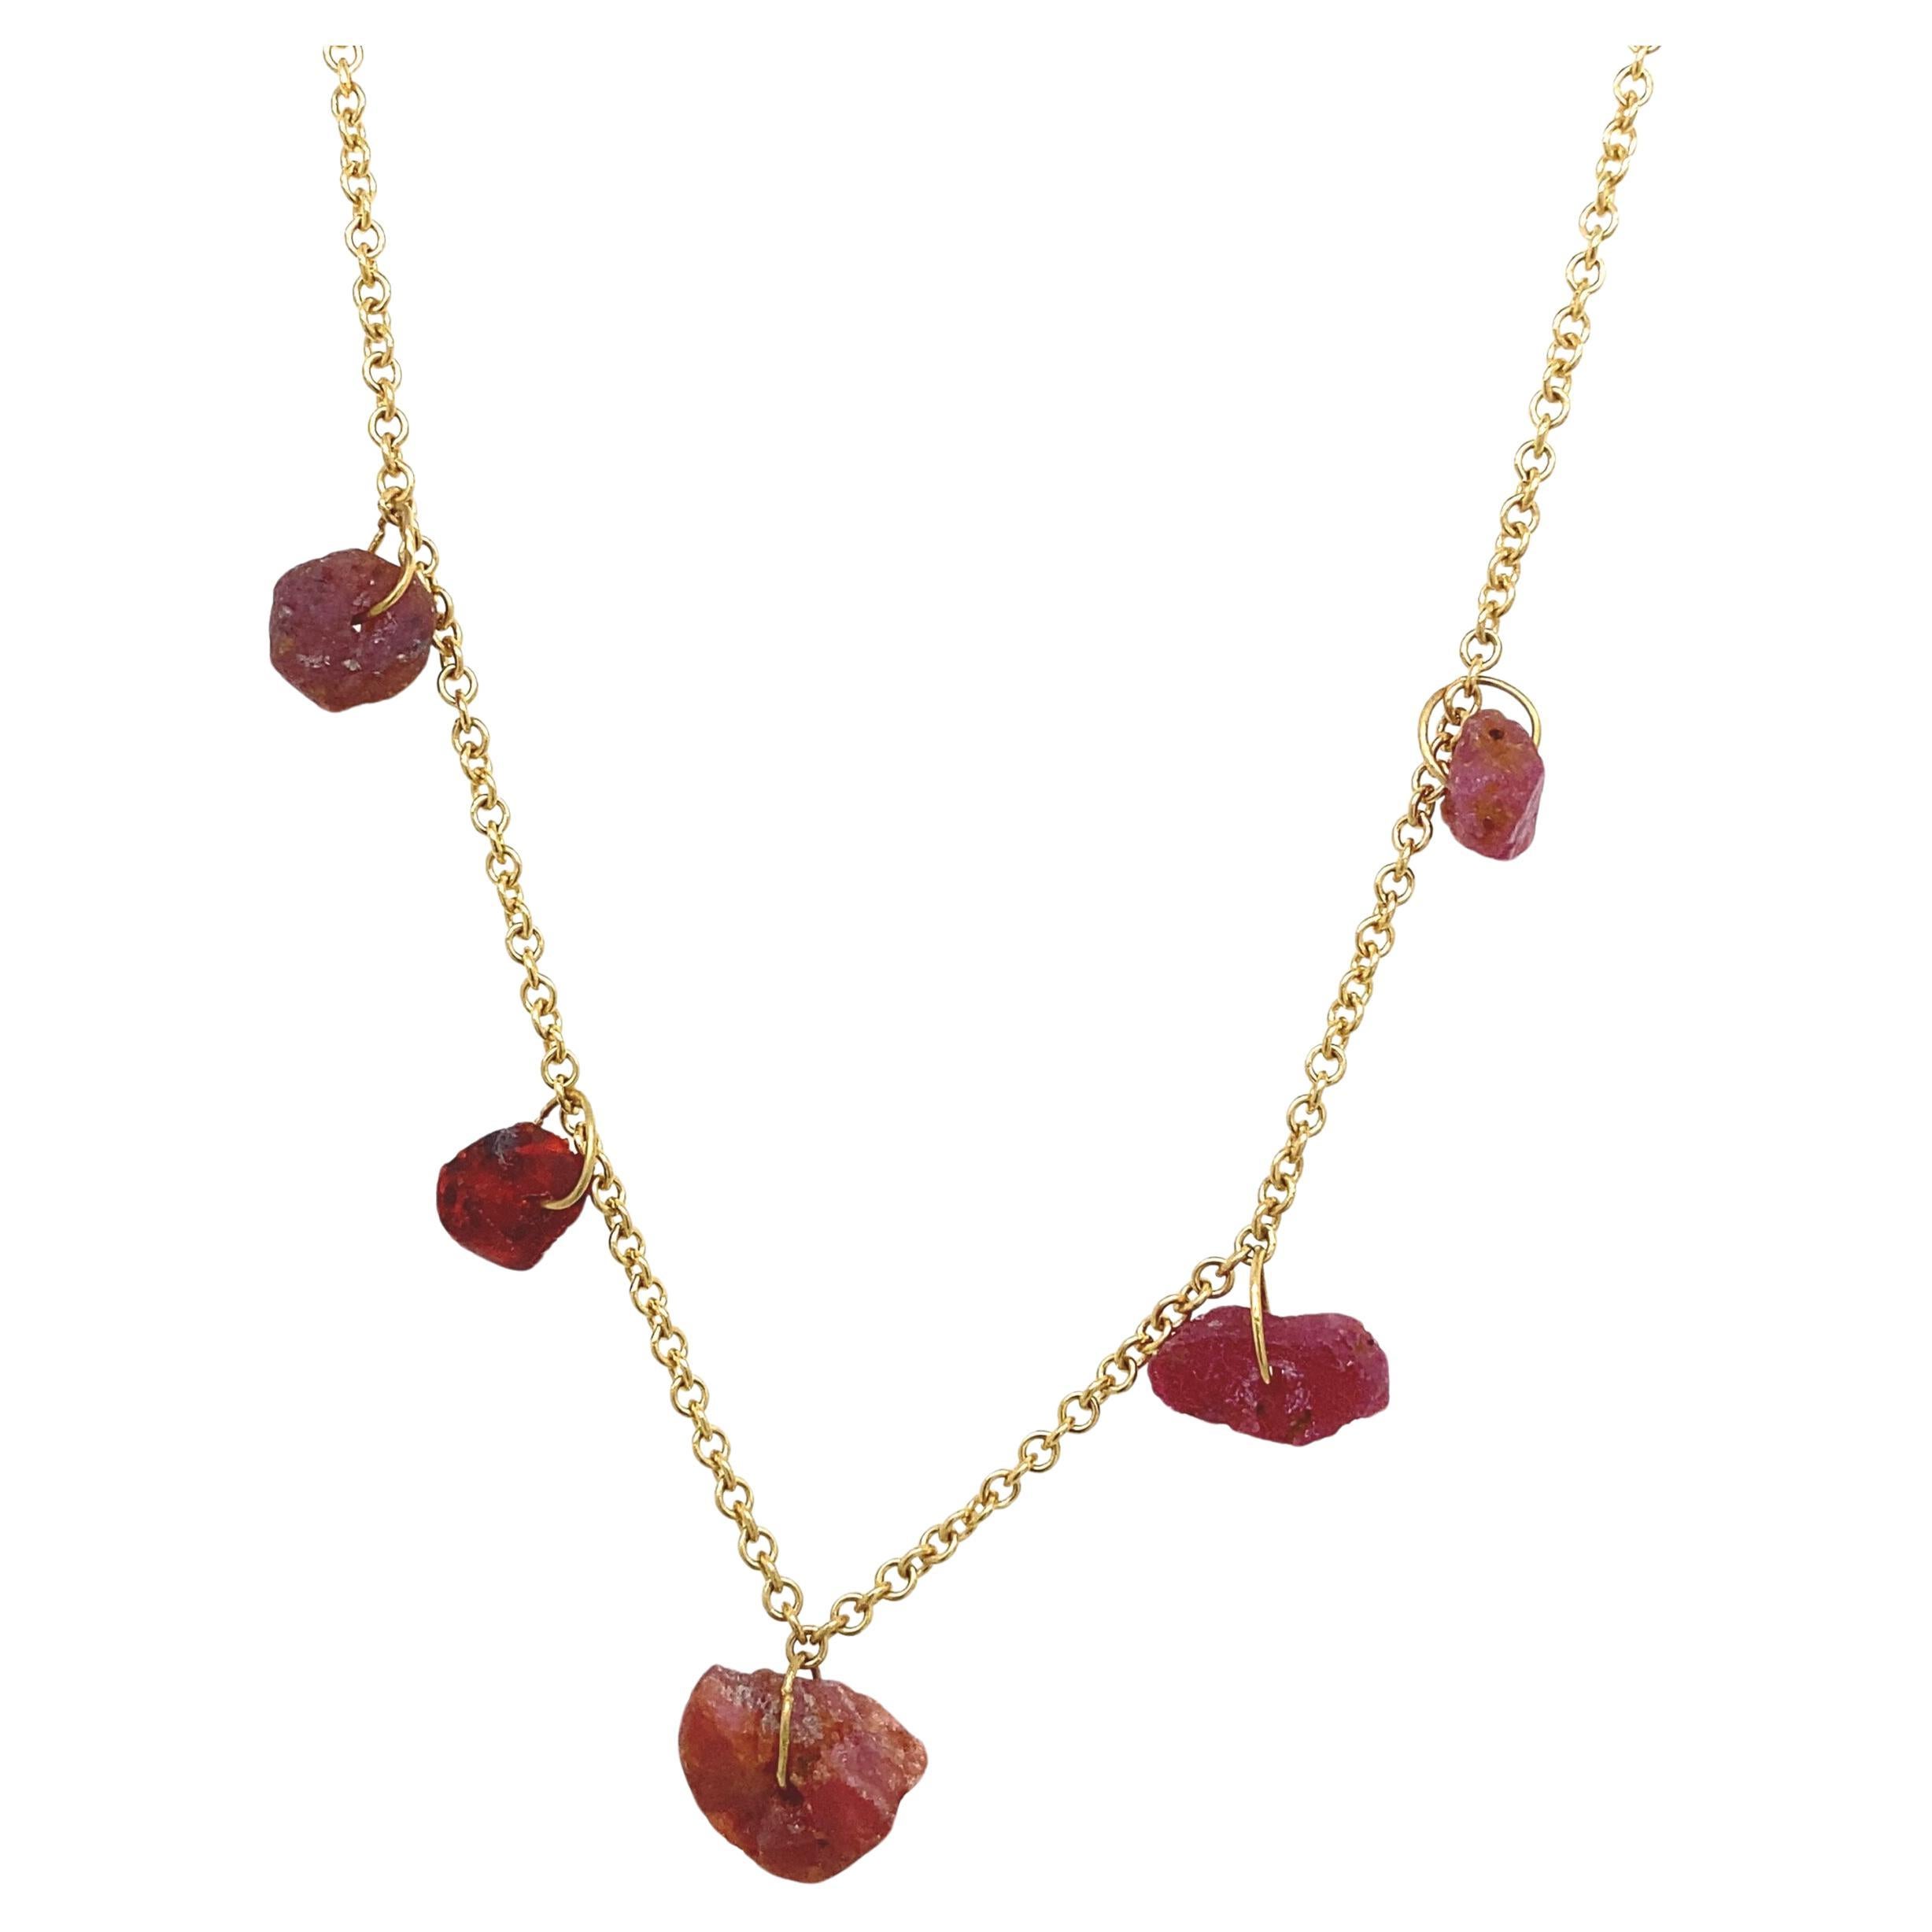 8.40ct Necklace Set with 5 Natural Rubies in 18ct Yellow Gold For Sale